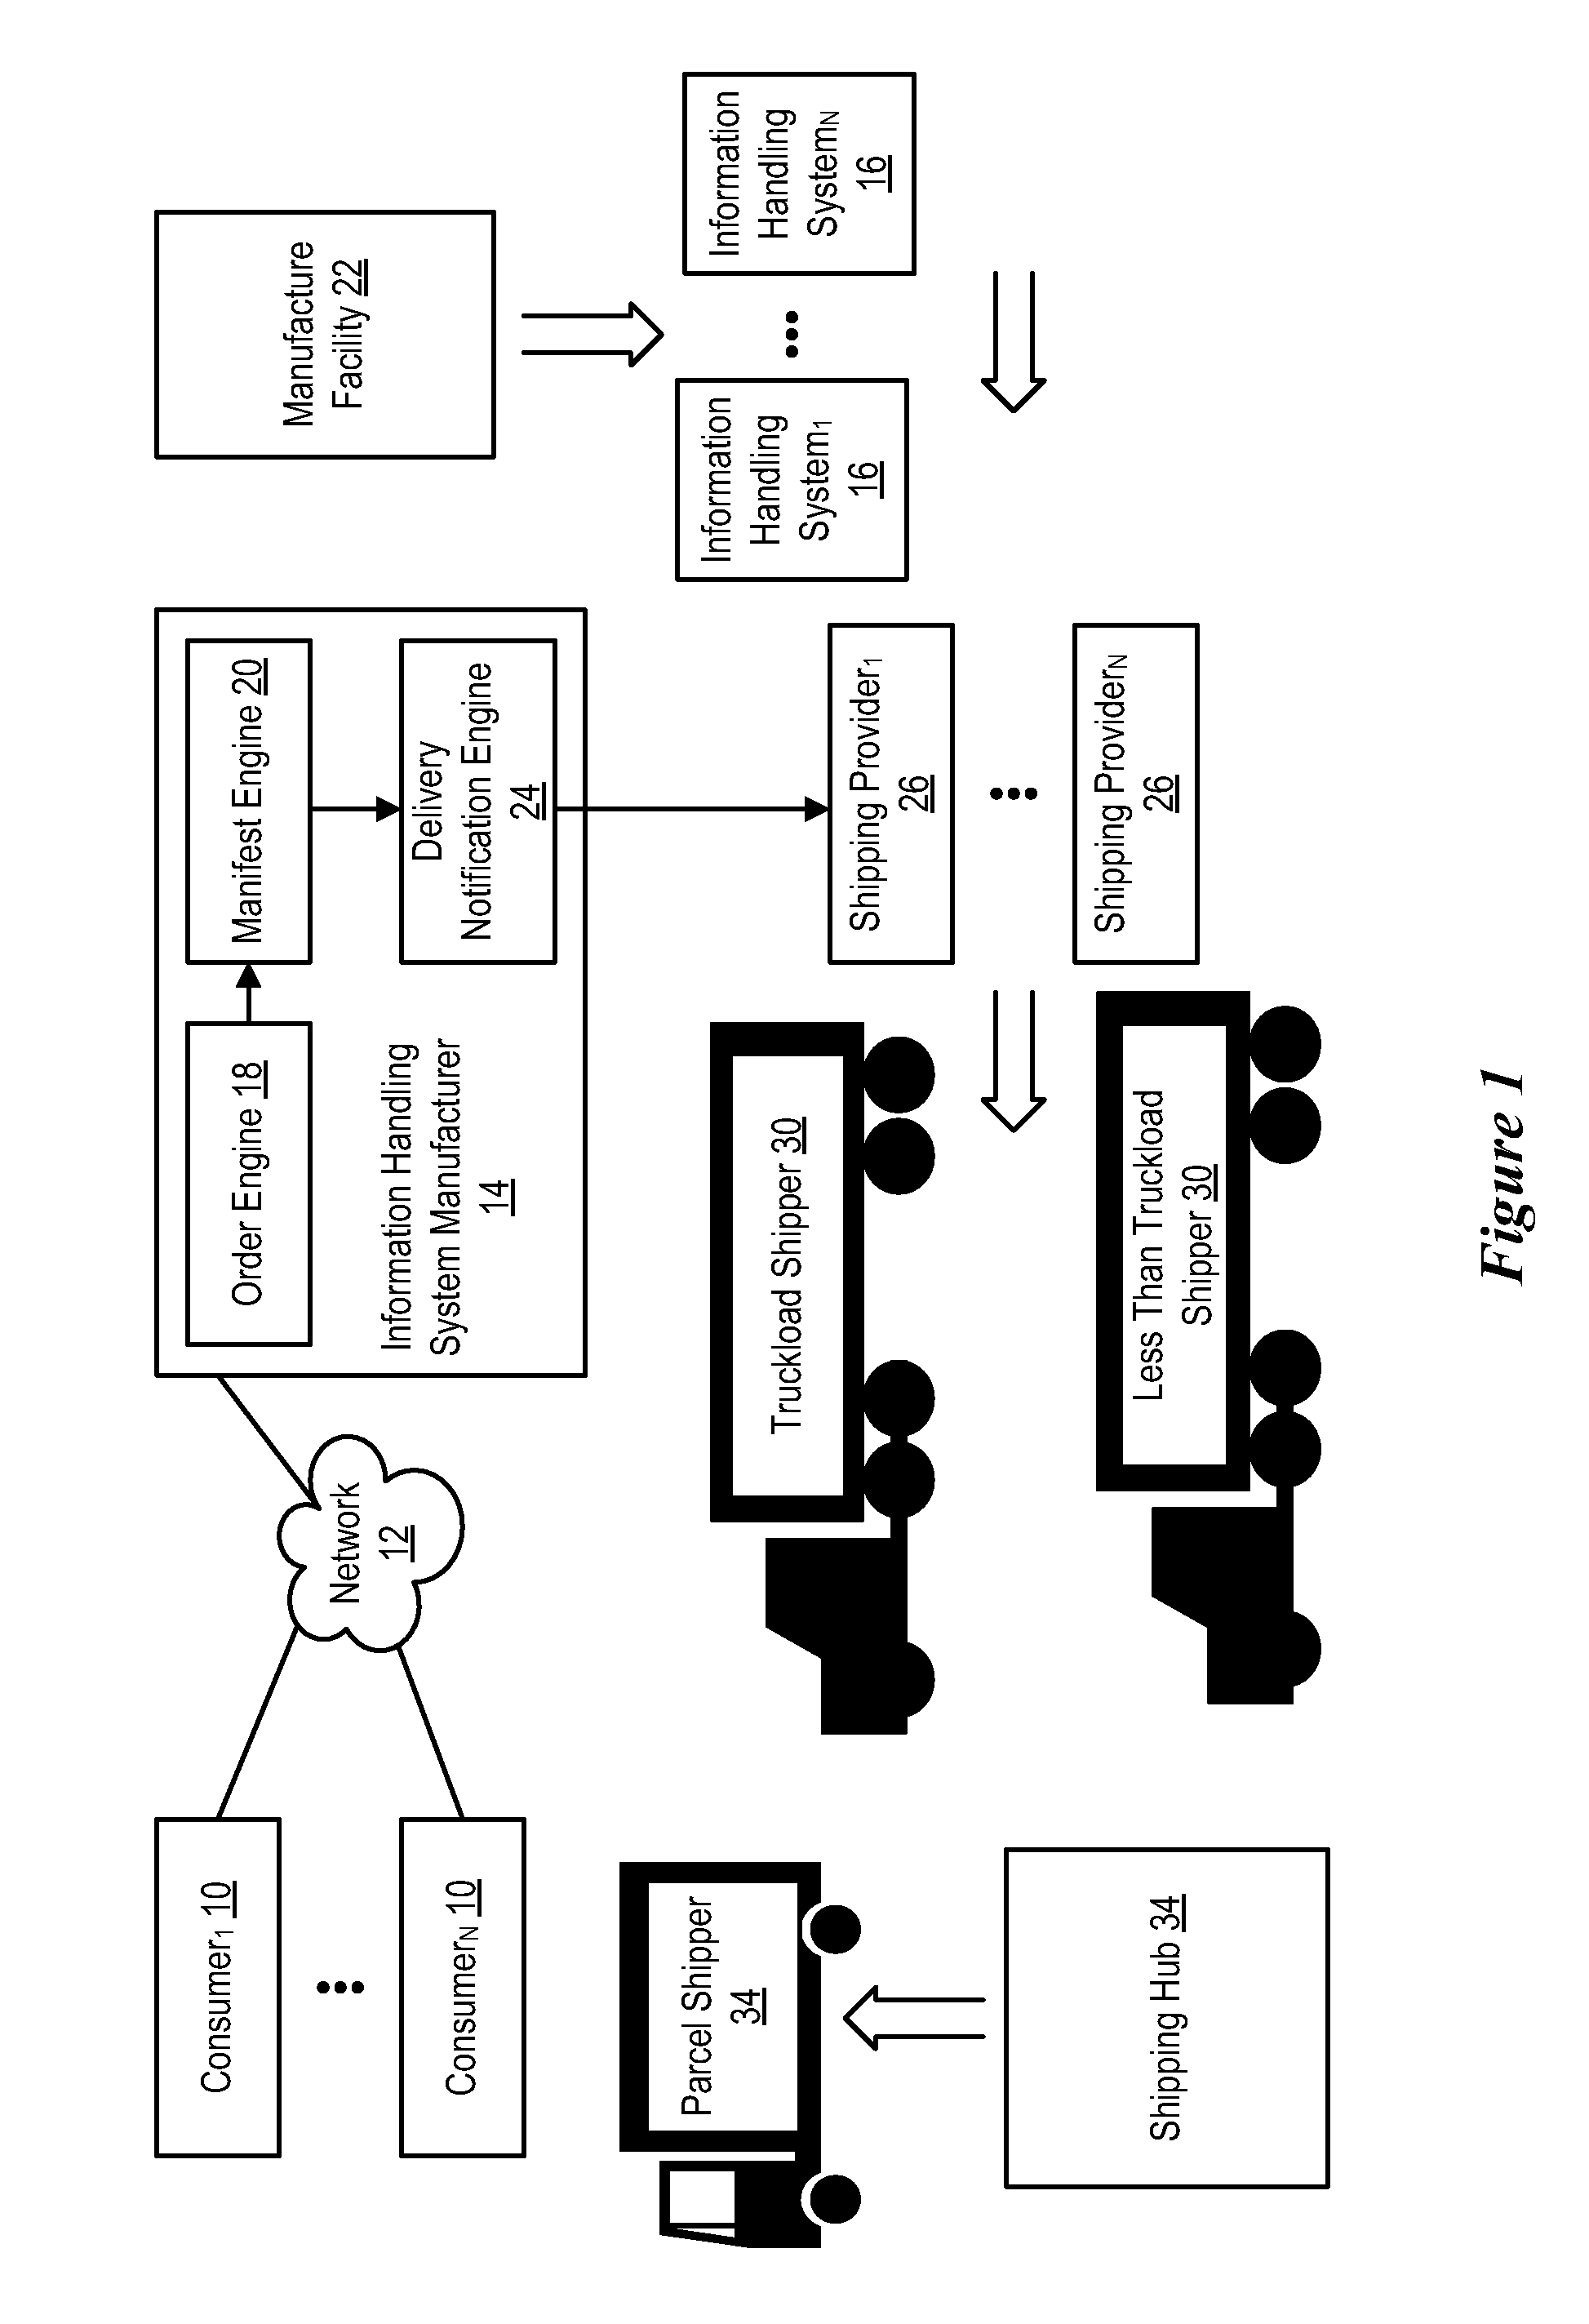 System and method for customer delivery notification